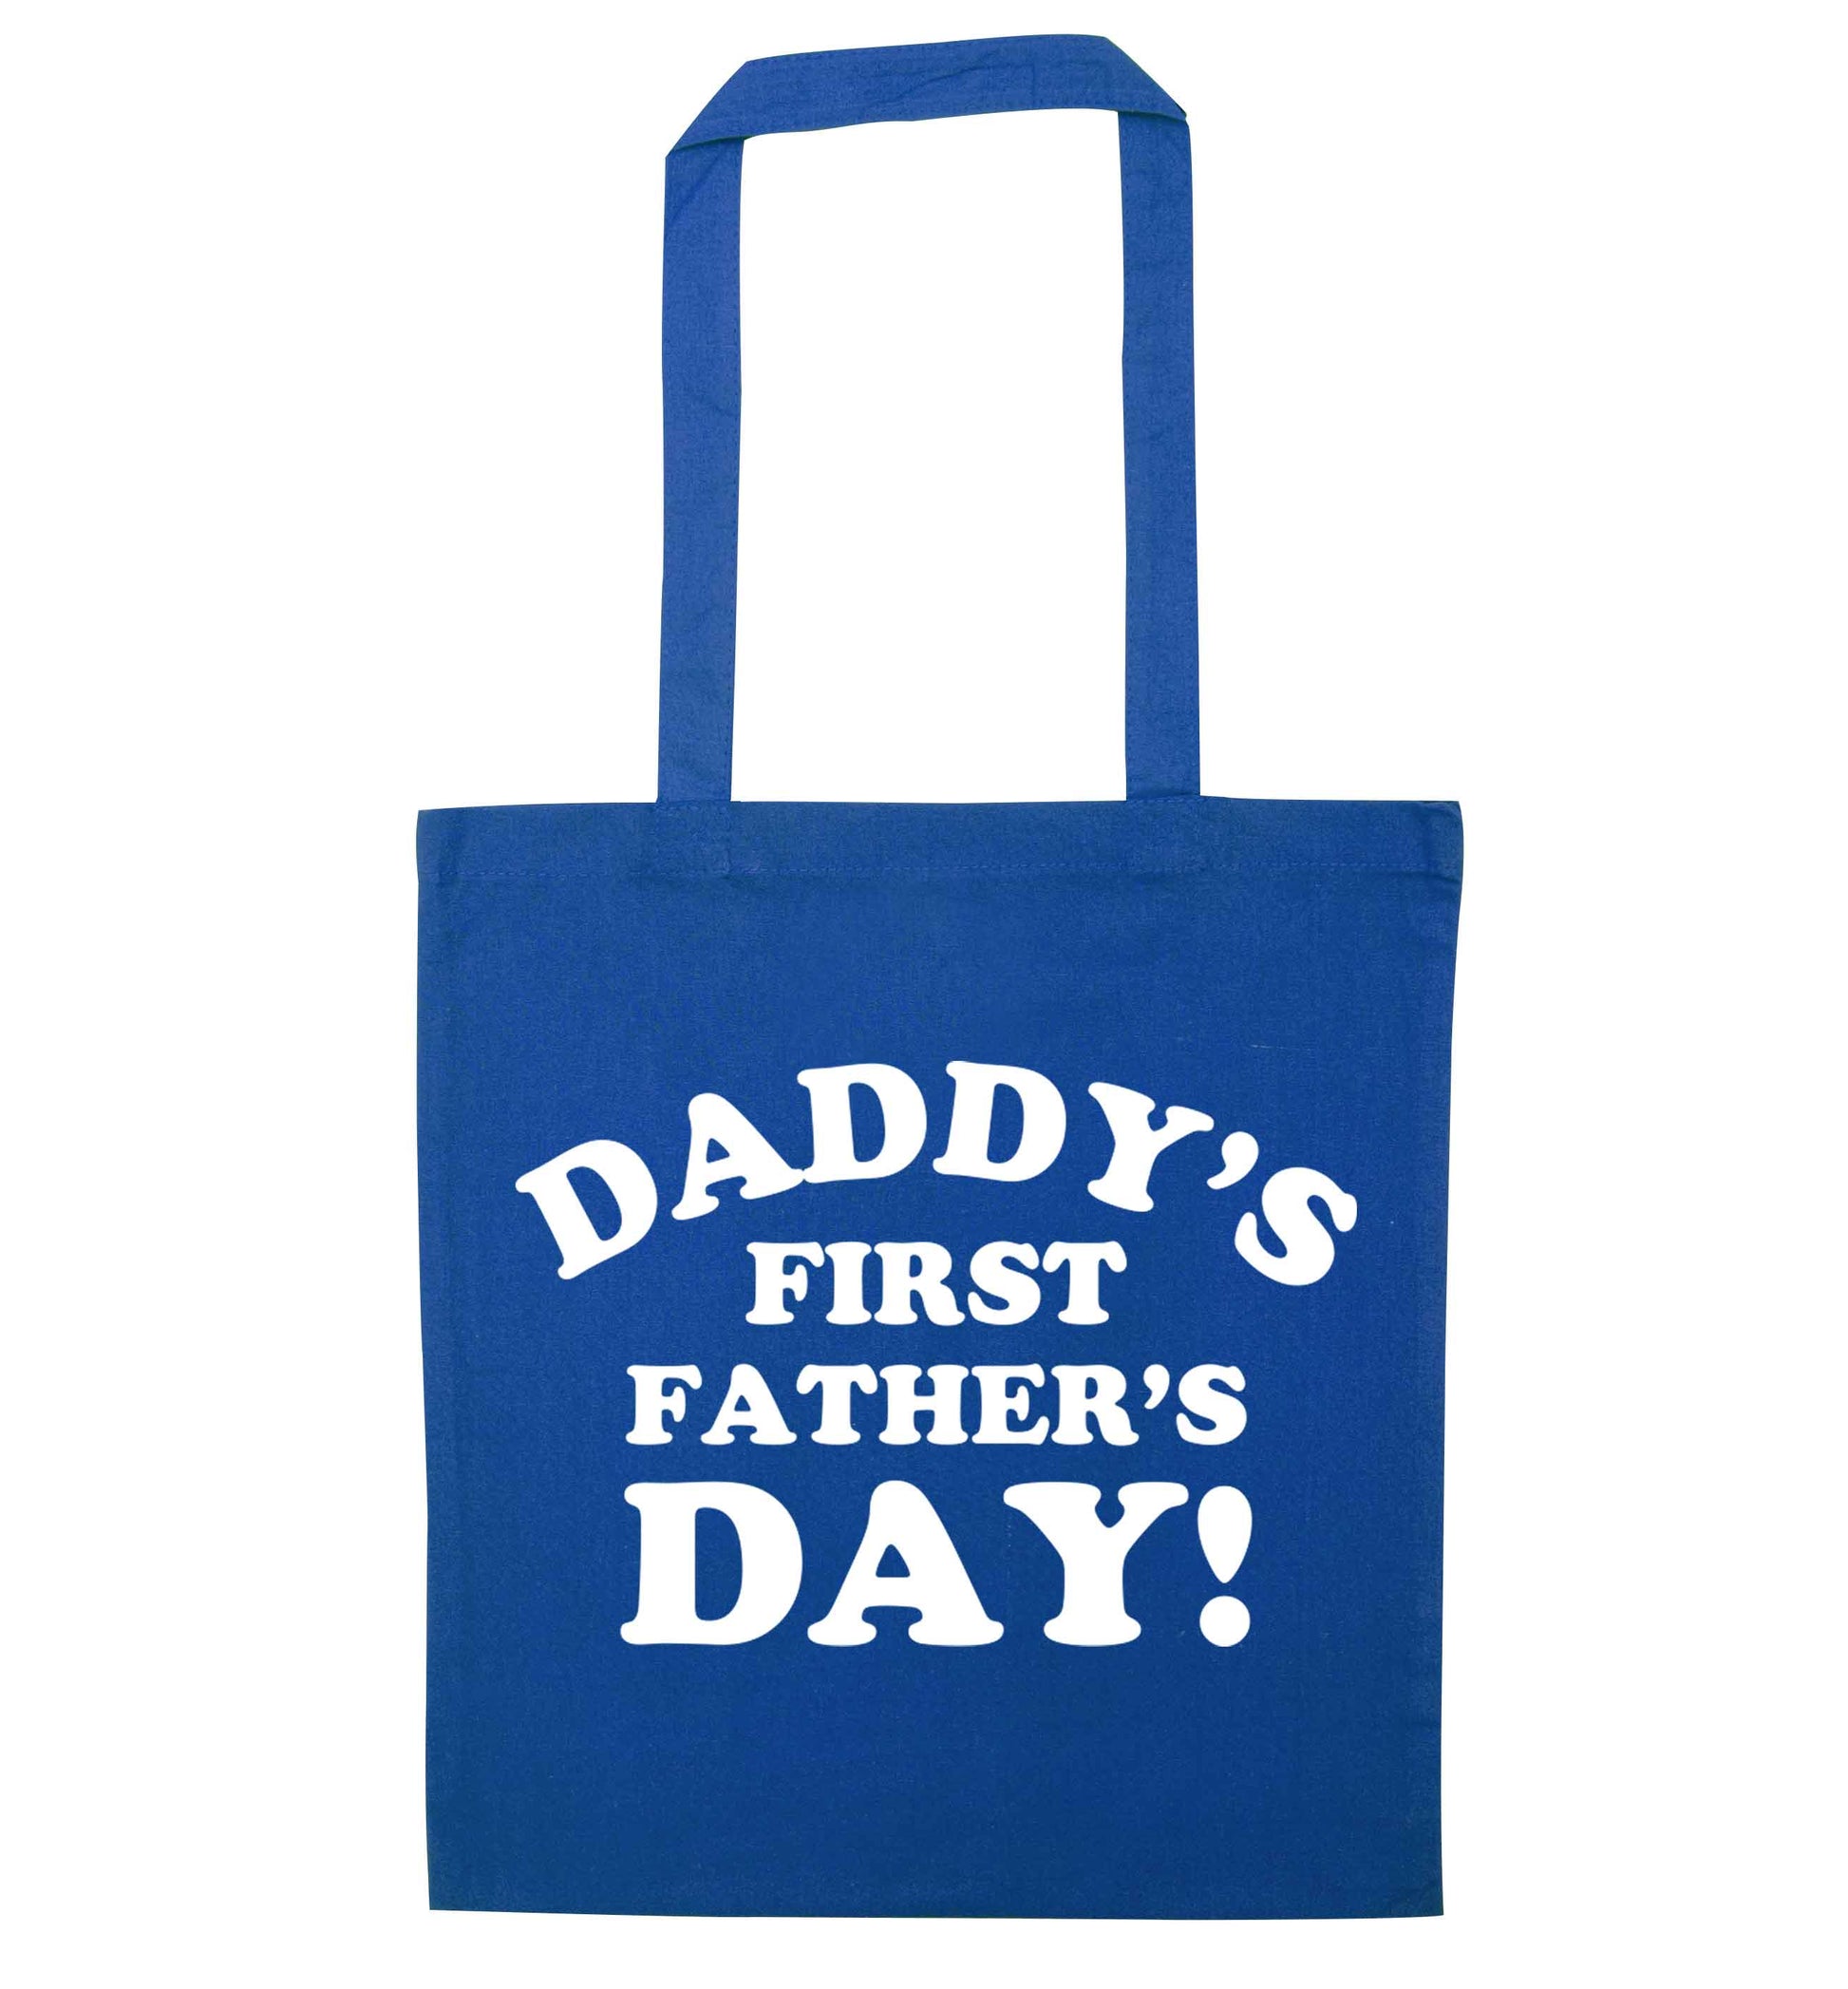 Daddy's first father's day blue tote bag